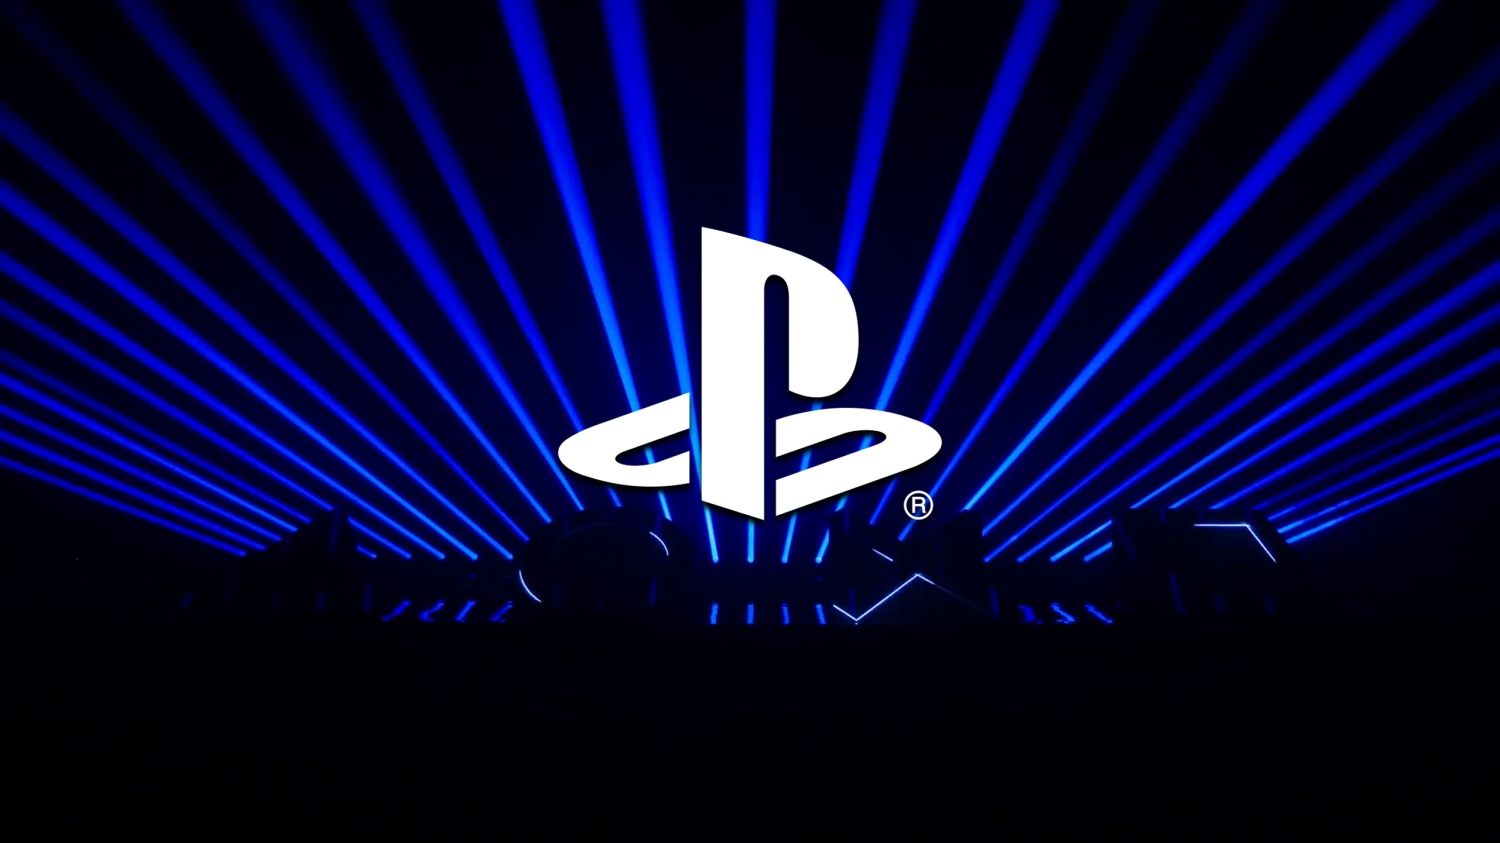 PlayStation State of Play September 2023: the biggest